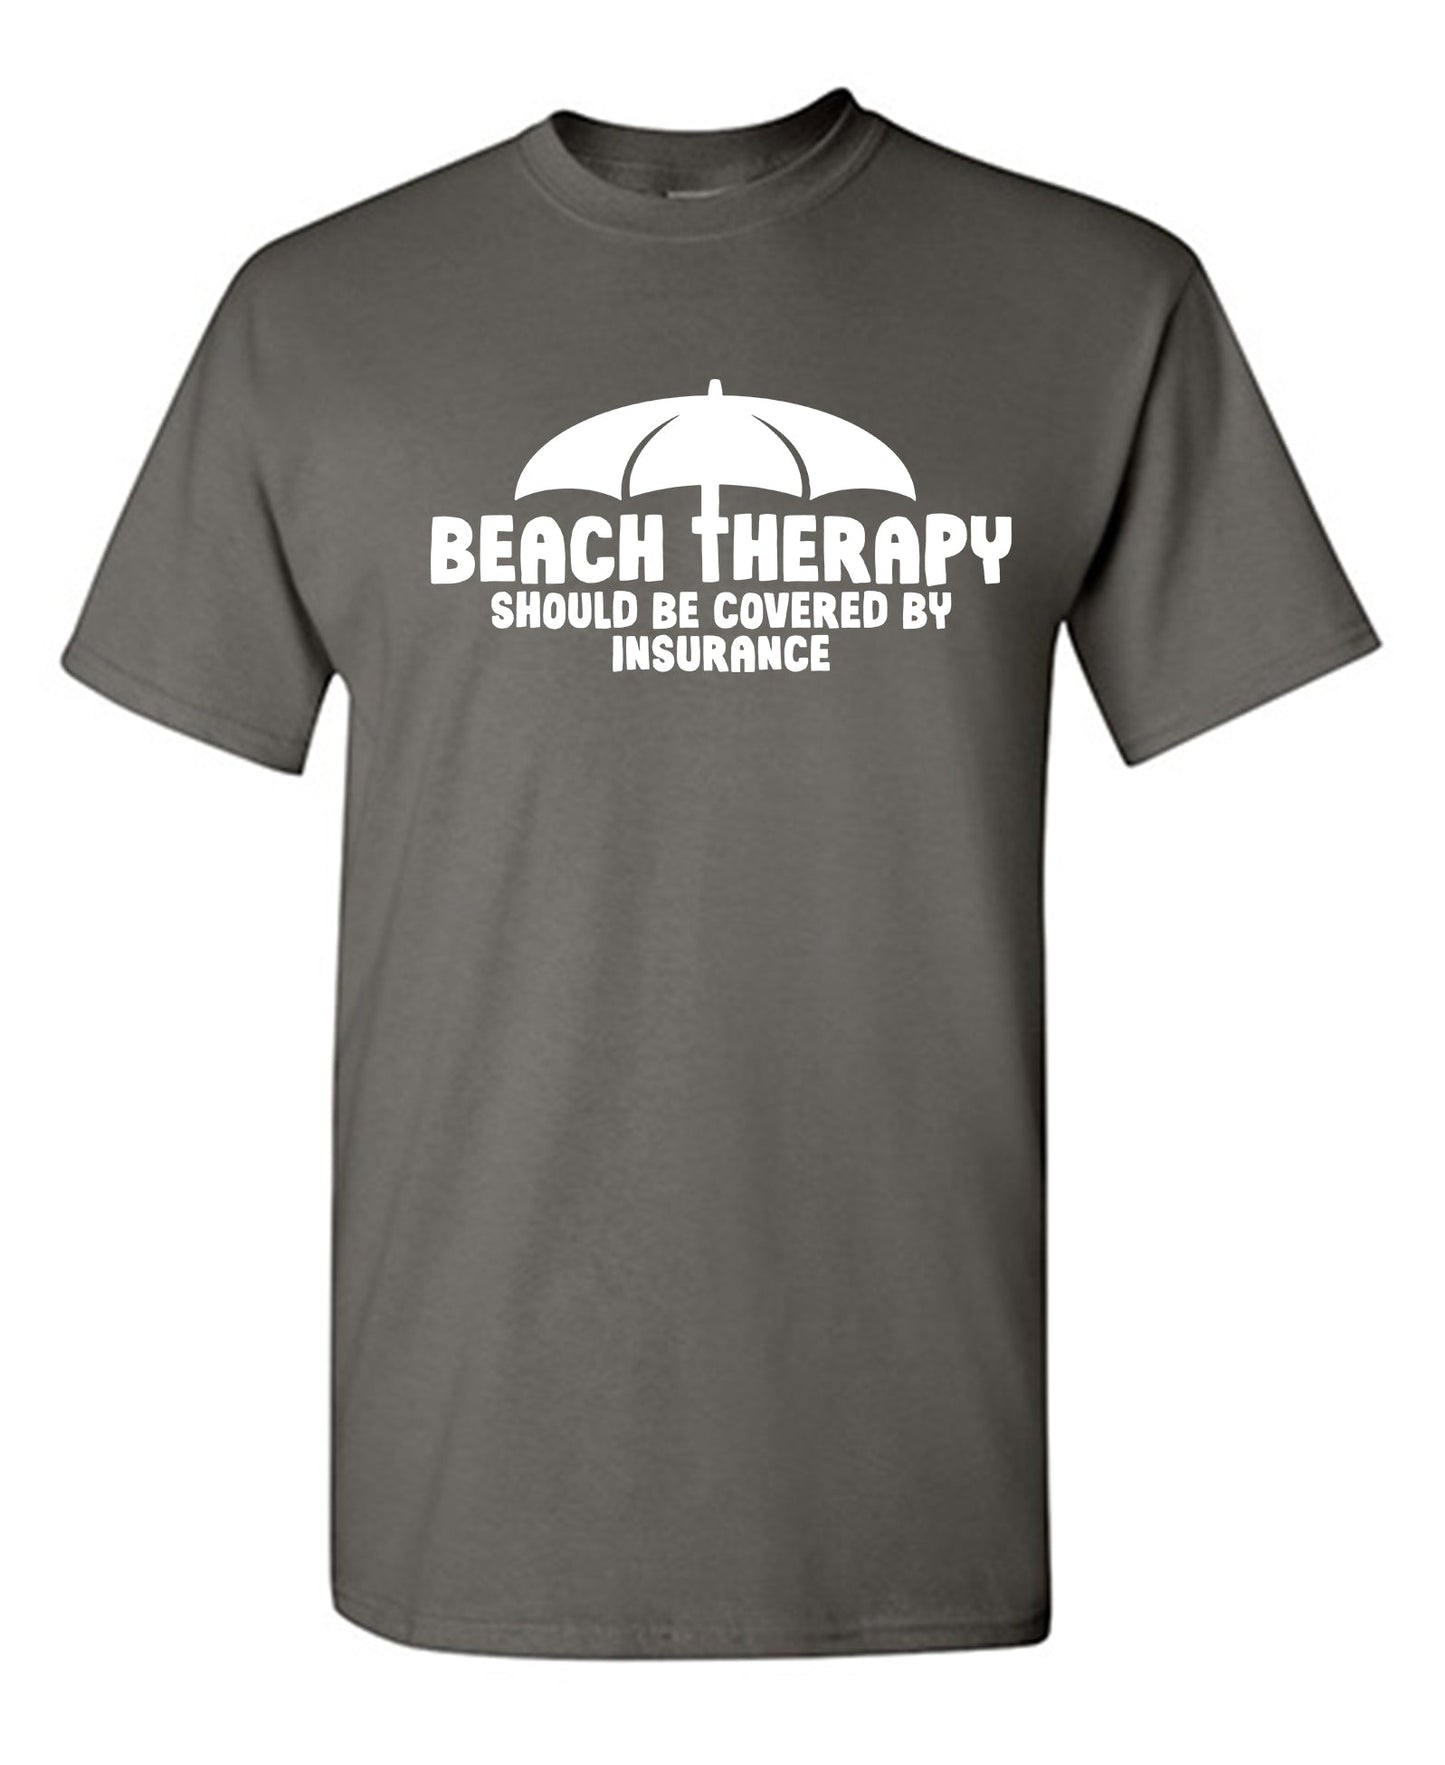 Beach Therapy Should be Covered By Insurance - Funny T Shirts & Graphic Tees